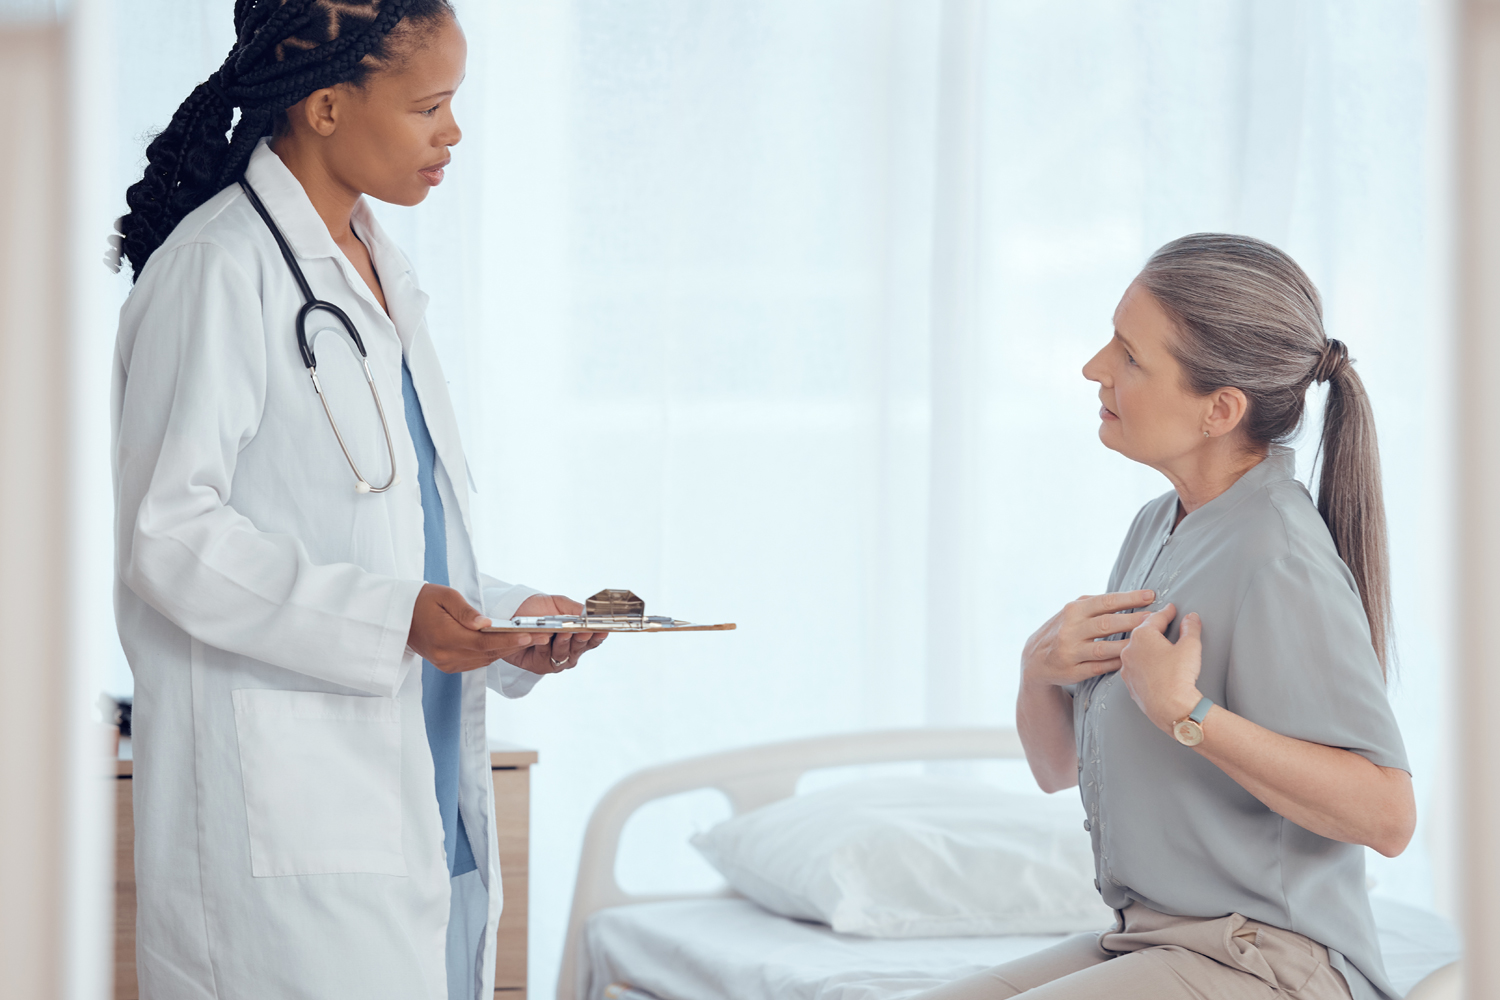 How should I describe my cancer pain to my doctor?